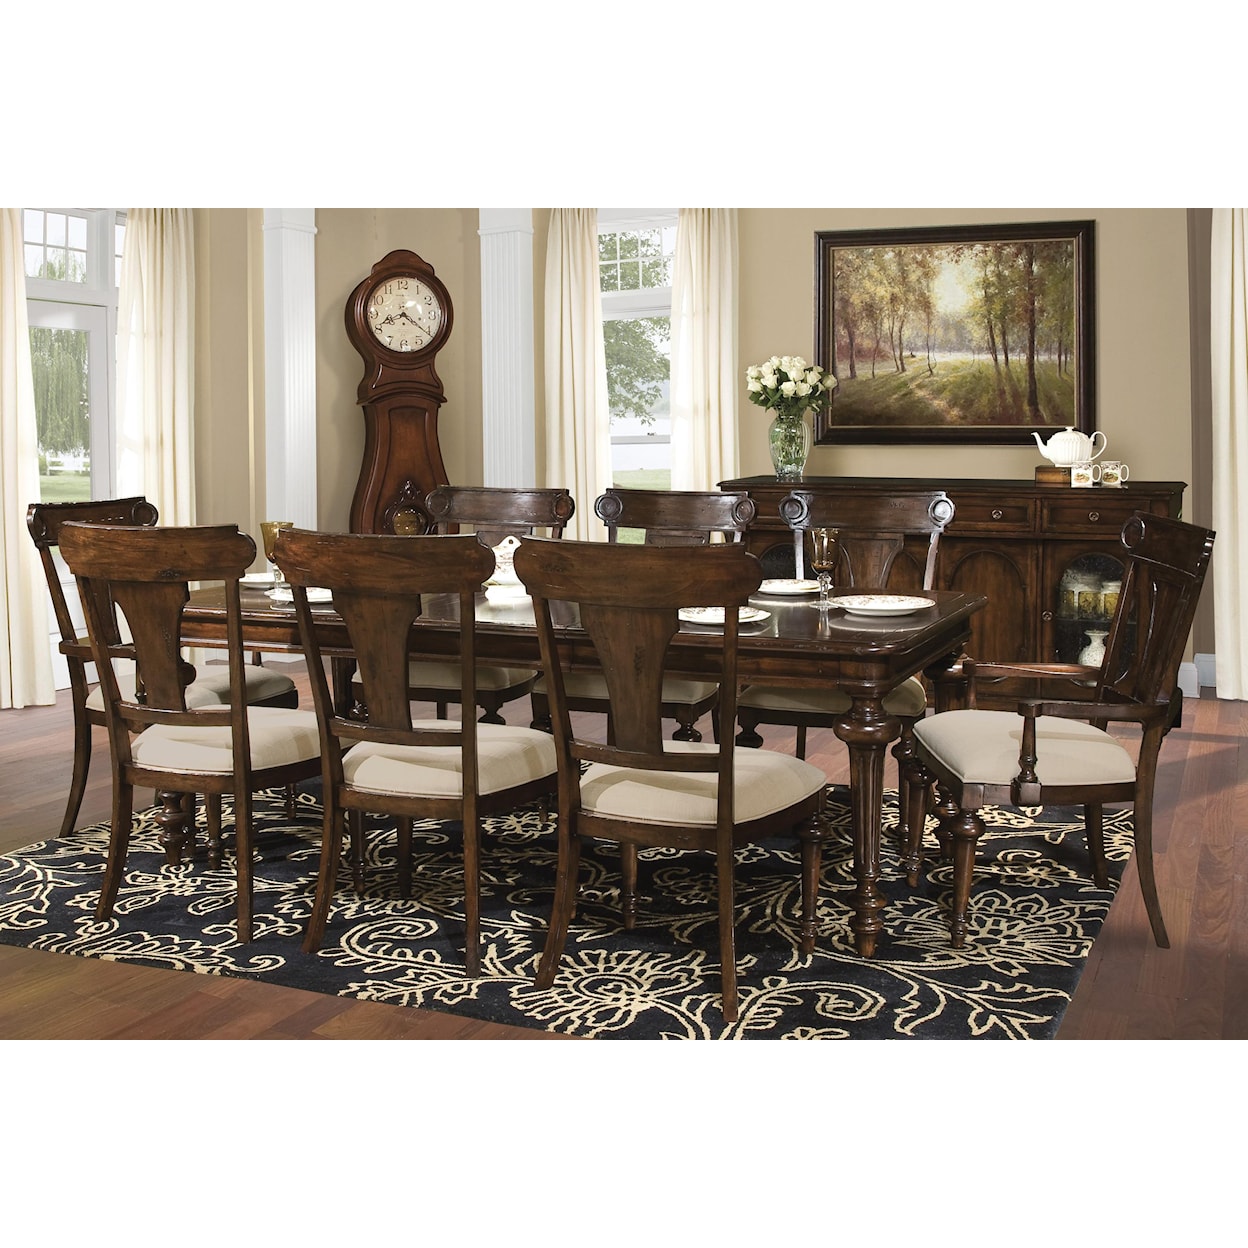 Hekman Charleston Place Table and Chair Set